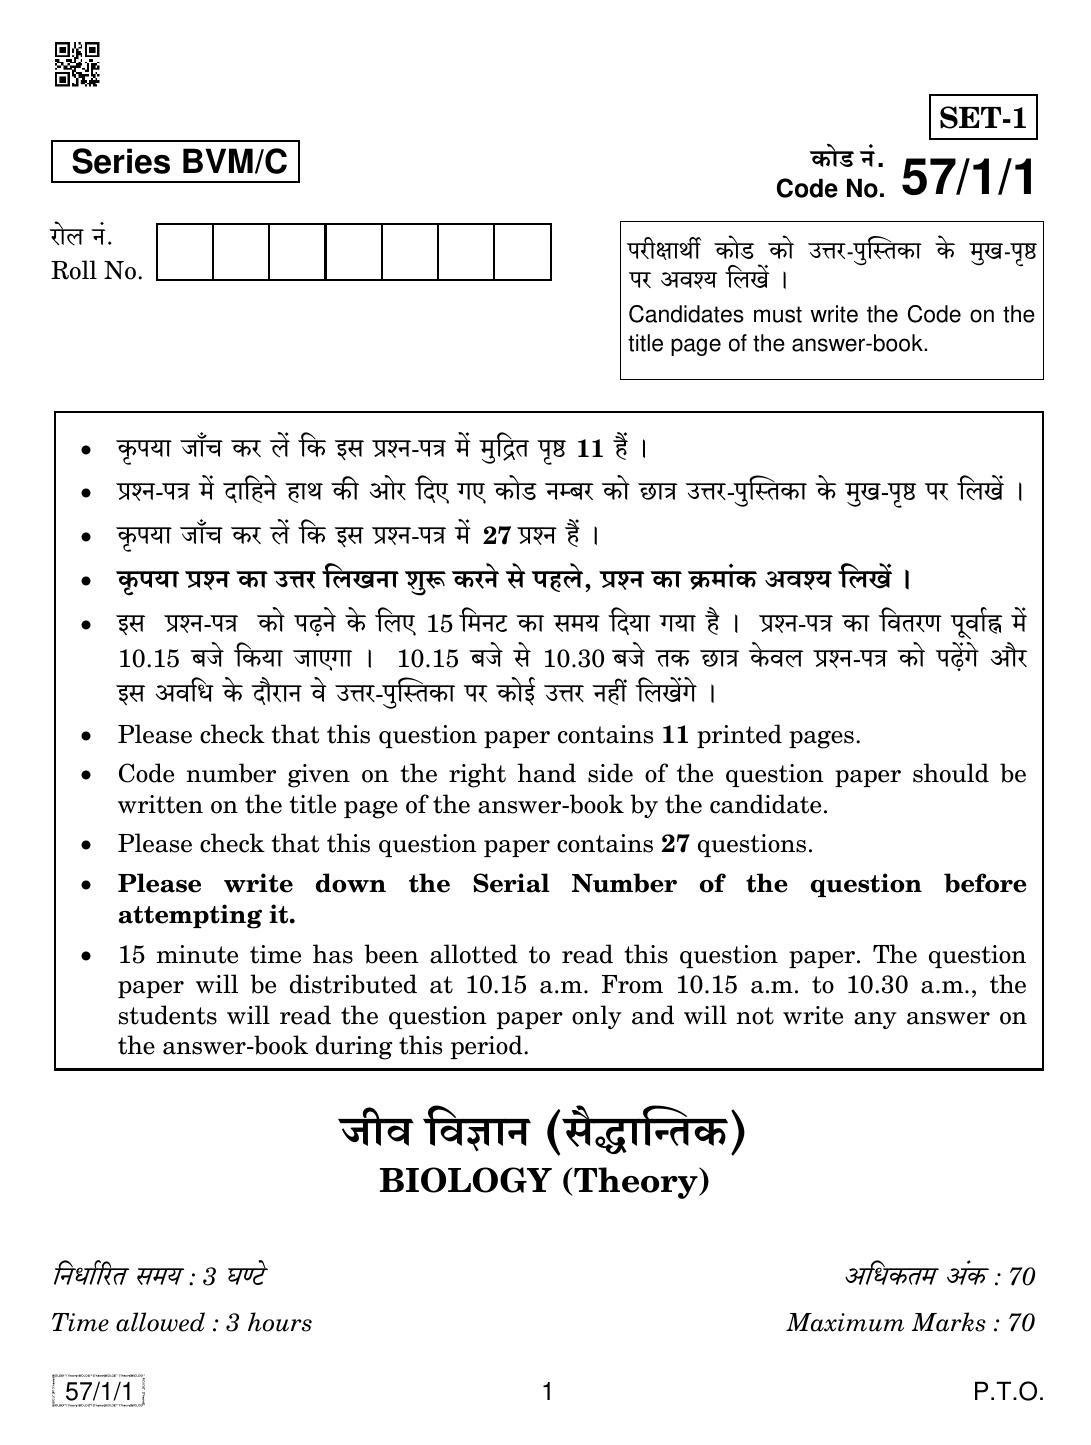 CBSE Class 12 57-1-1 BIOLOGY 2019 Compartment Question Paper - Page 1